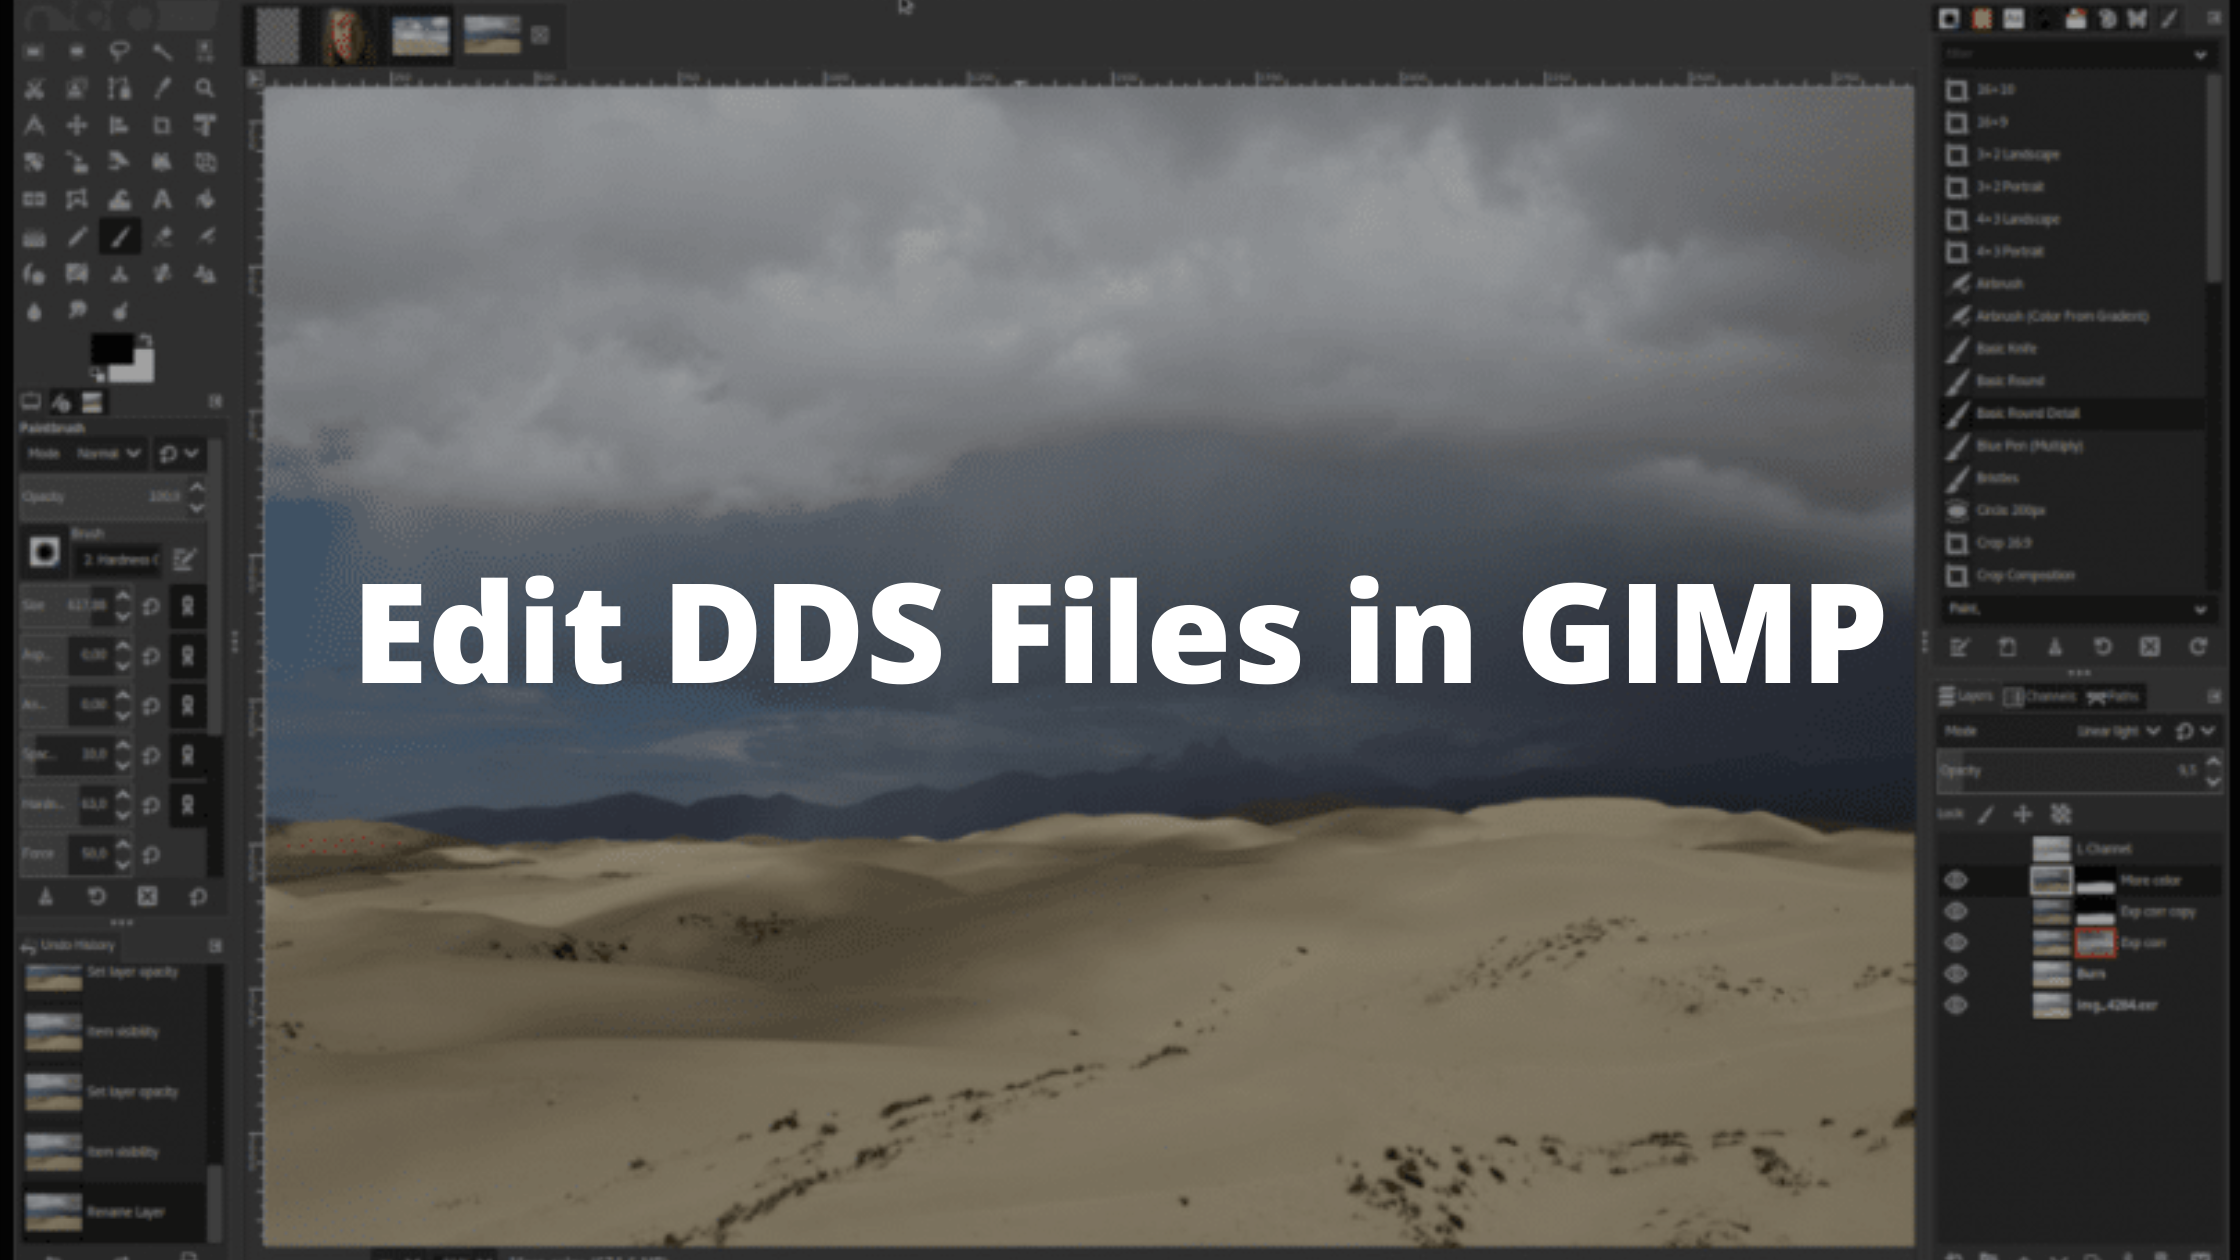 gimp dds plugin could not open image